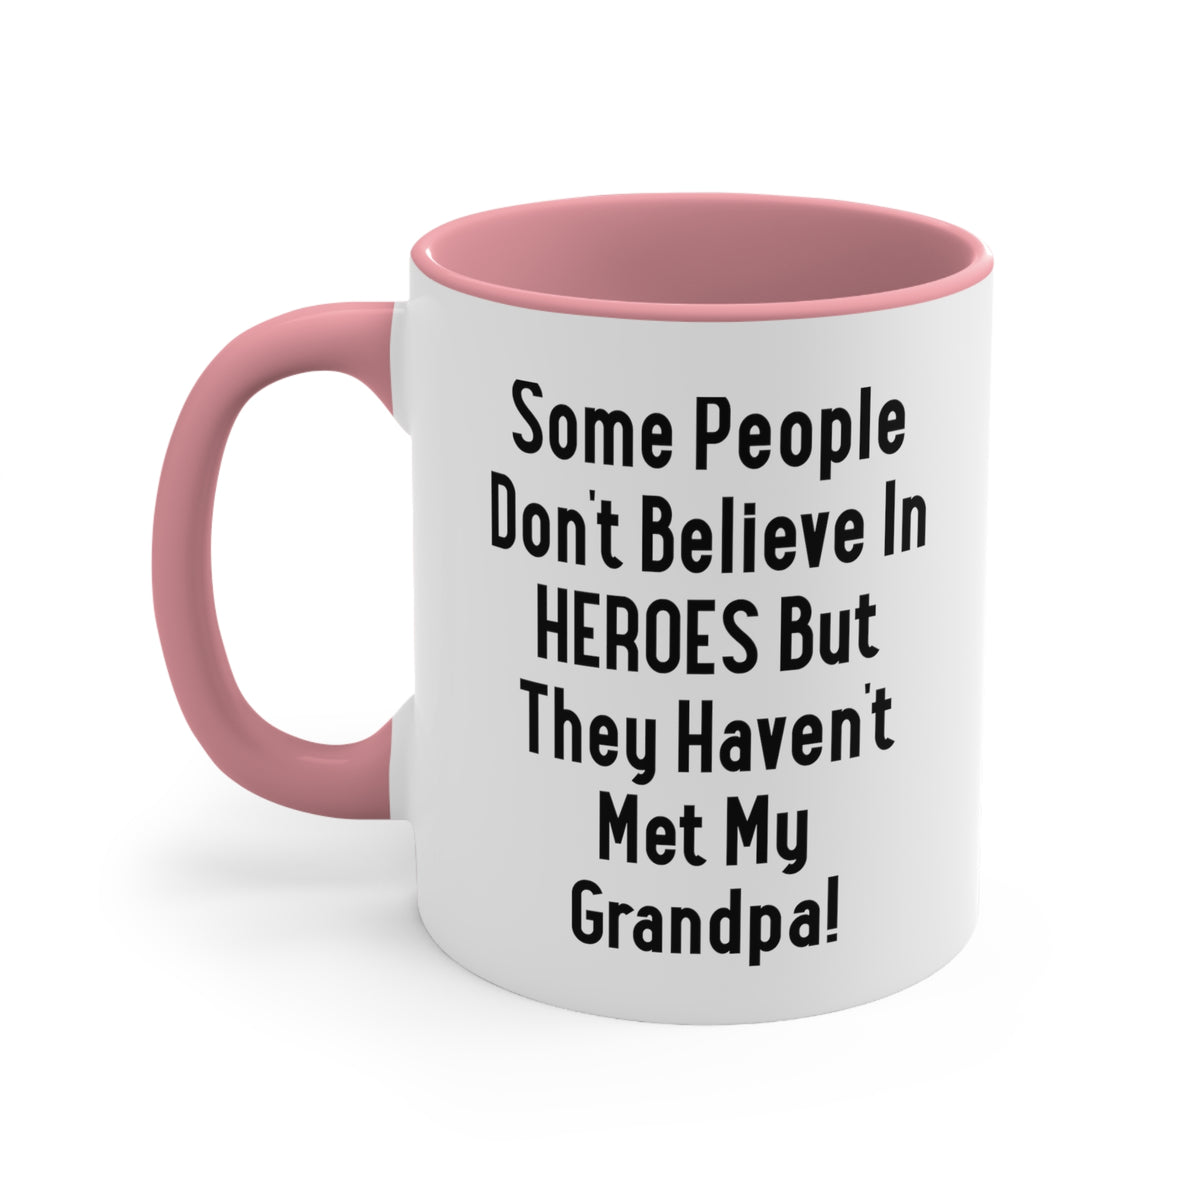 Useful Grandpa, Some People Don't Believe In HEROES But They Haven't Met My Grandpa!, Father's Day Two Tone 11oz Mug For Grandpa